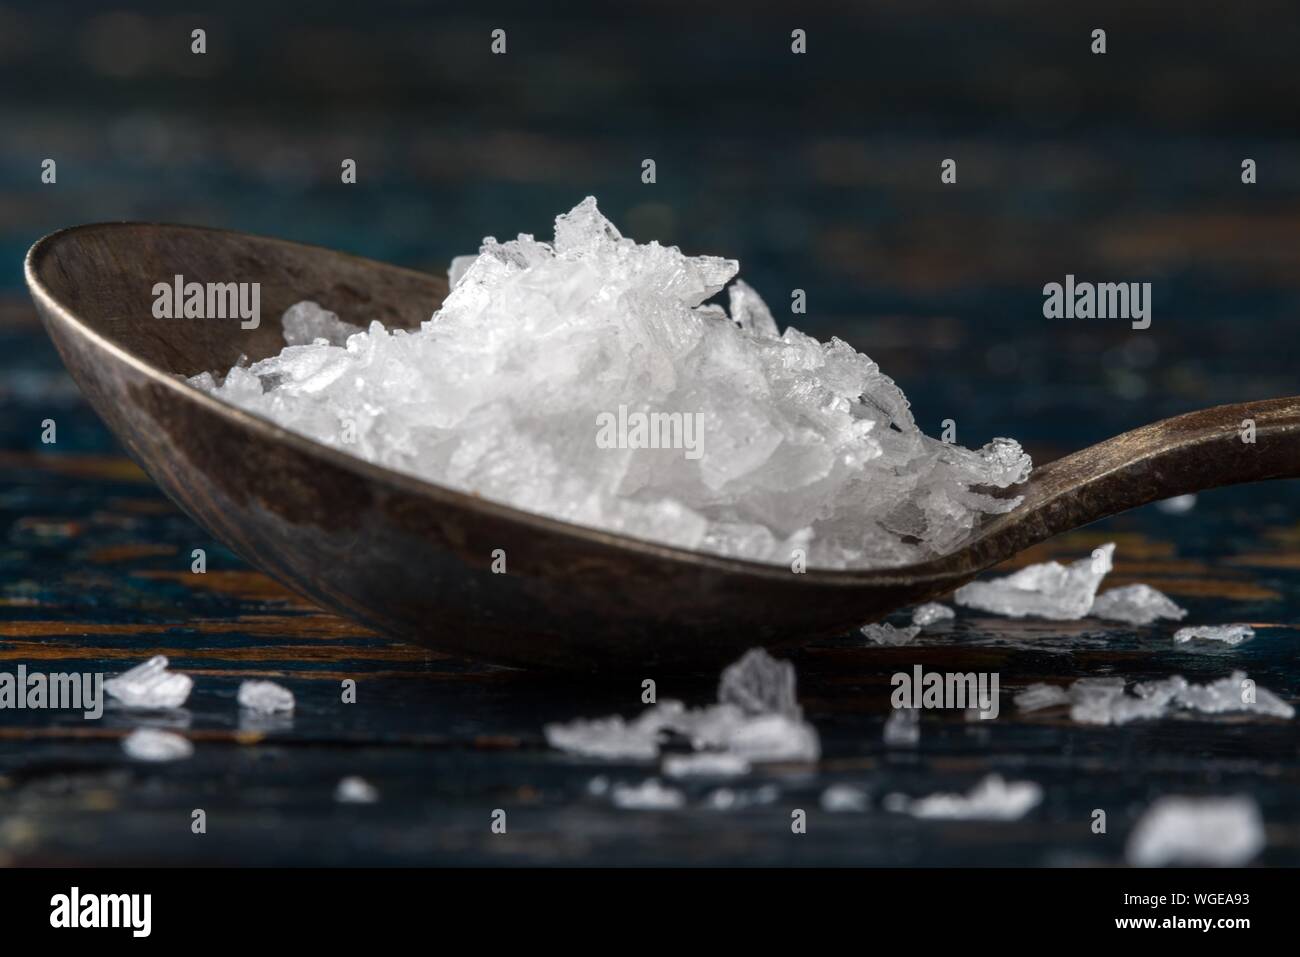 Close-up Of Flake Salt In Spoon On Wooden Table Stock Photo